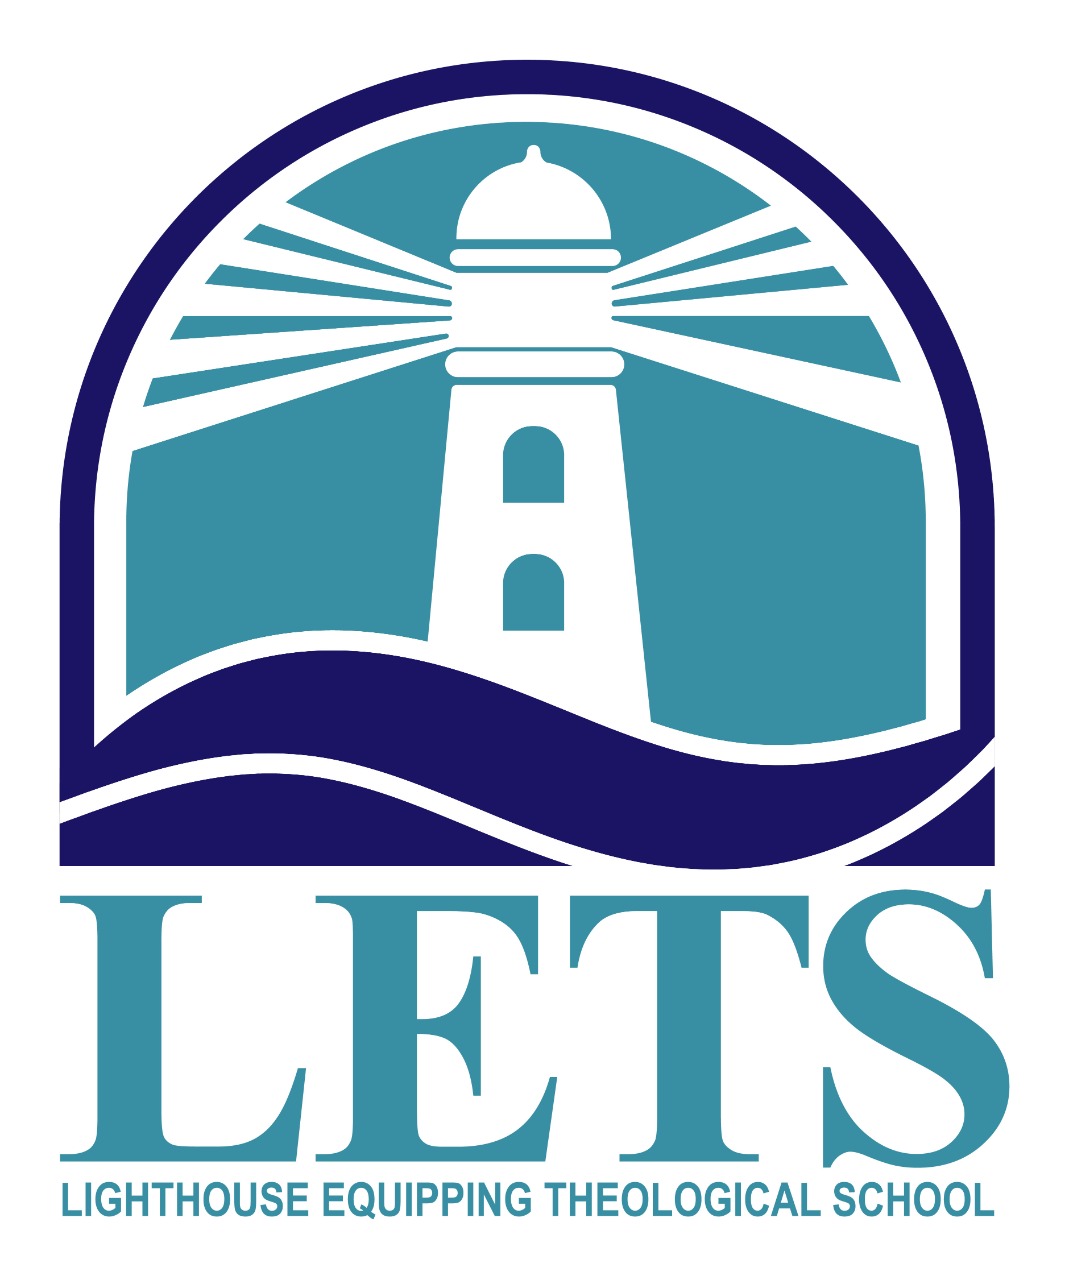 logo STT Lighthouse Equipping Theological School (Lets)